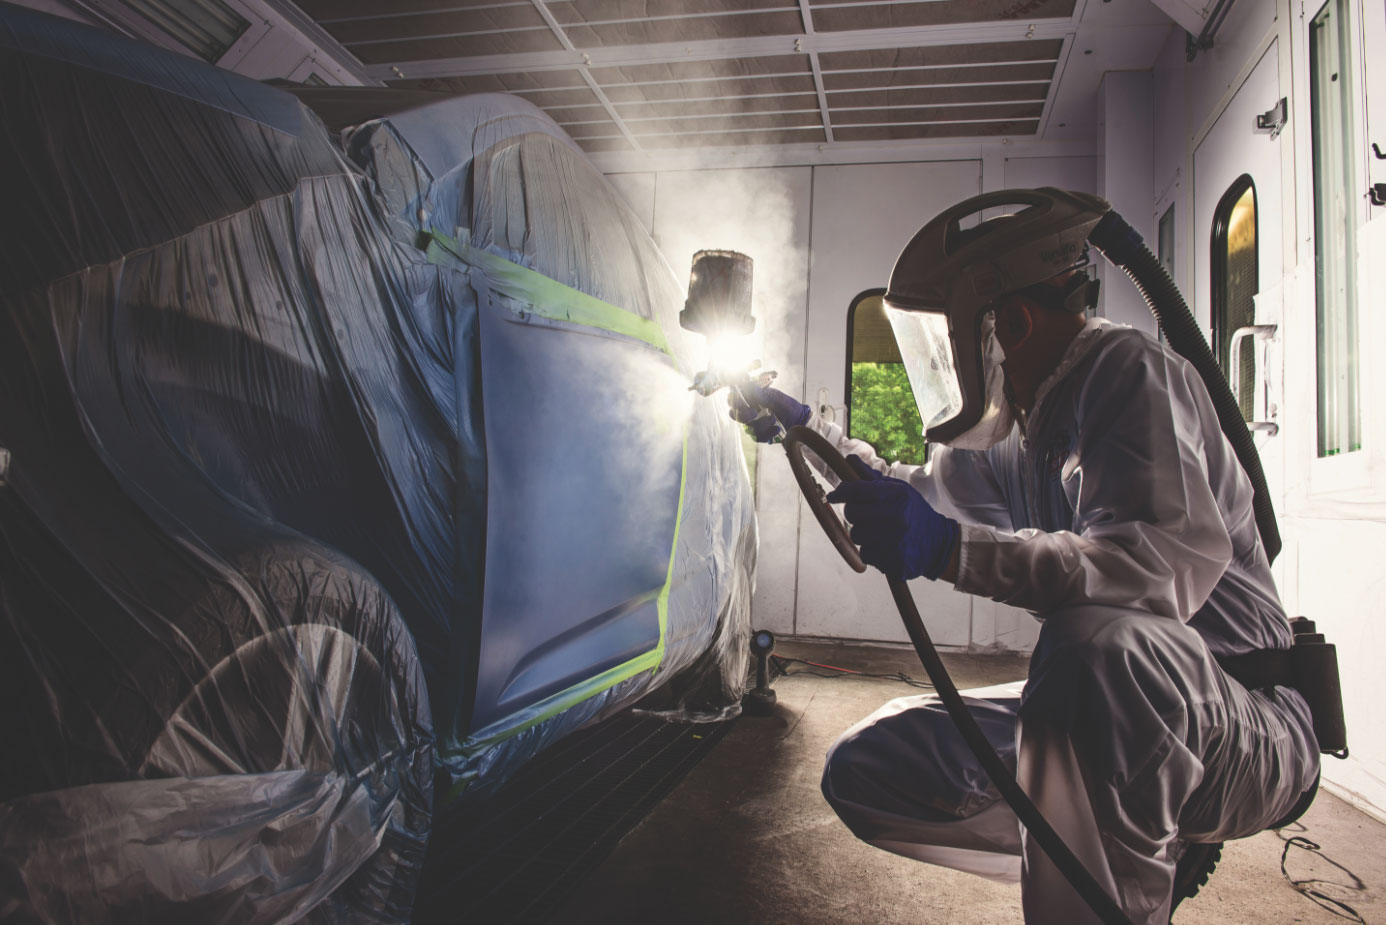 Automobile technican spraying vehicle in paint booth